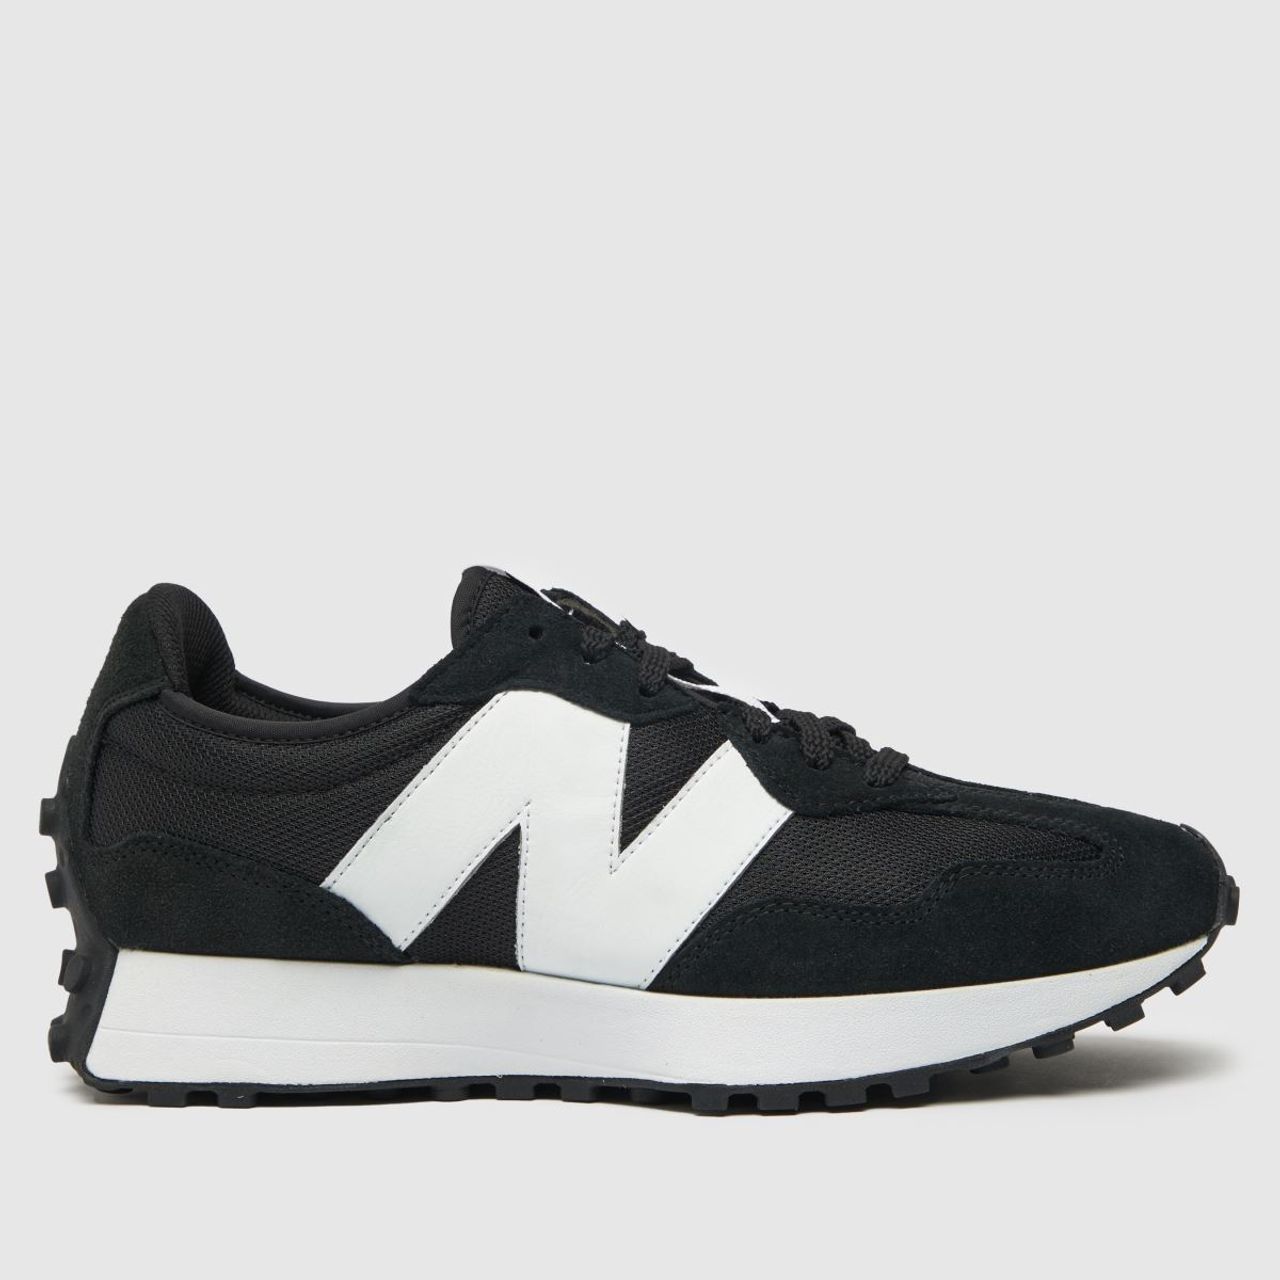 New Balance Black & White 327 Trainers, Size: 7 - Compare prices